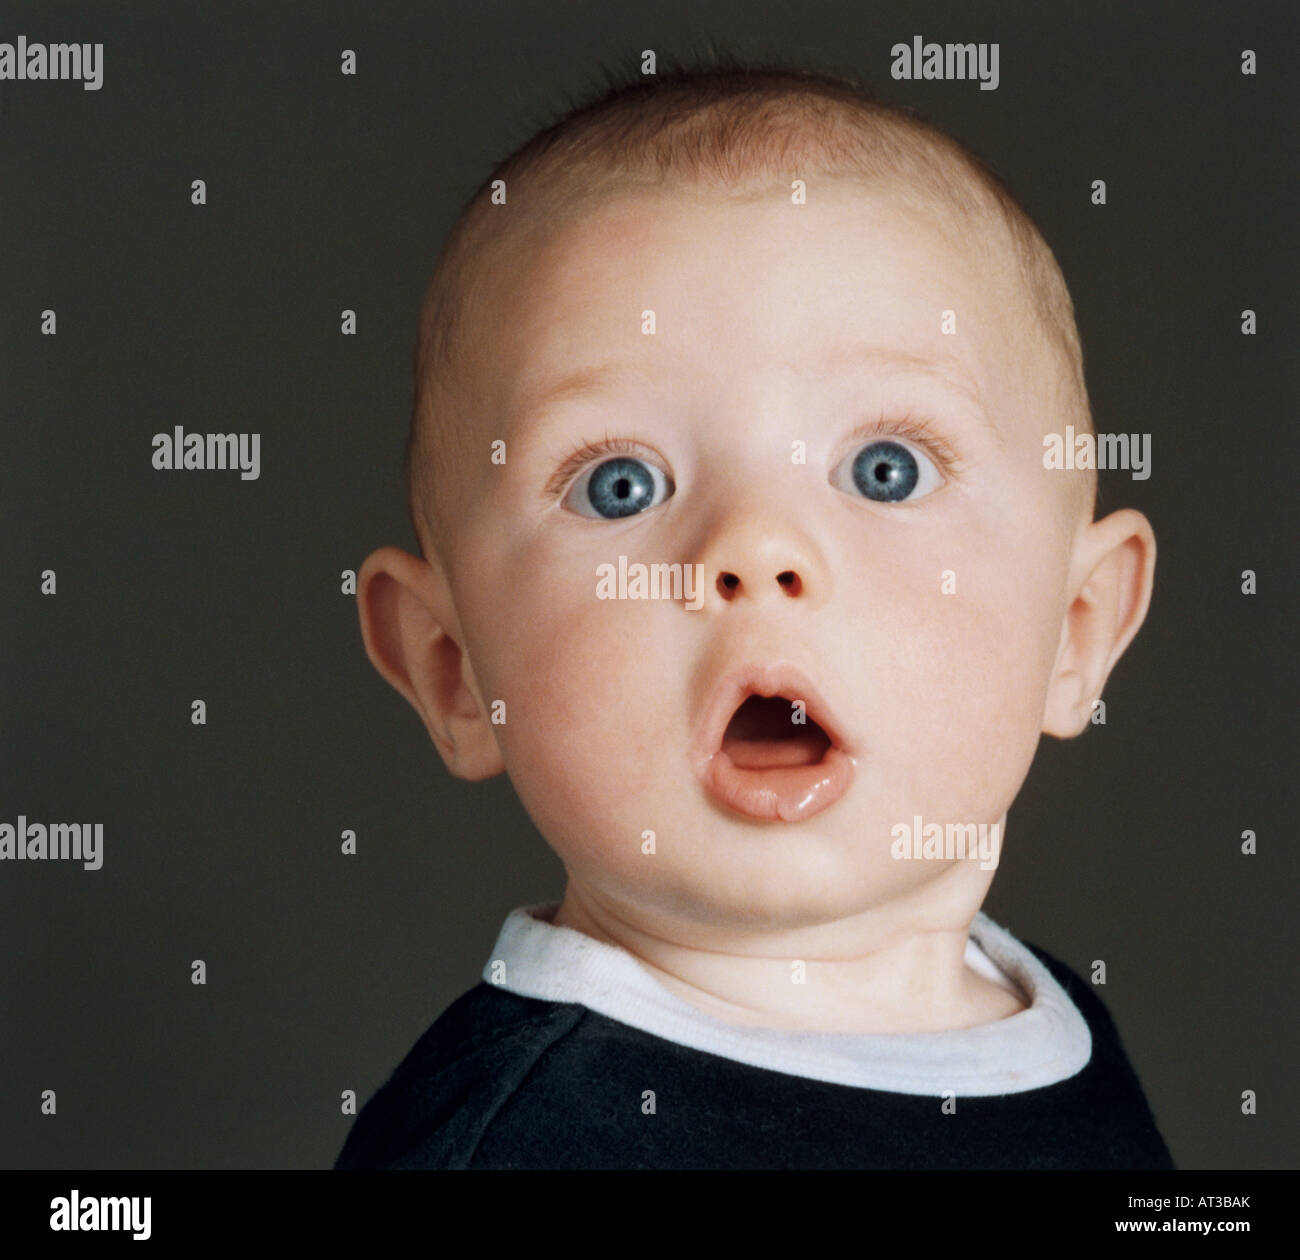 A portrait of a baby looking wide eyed Stock Photo